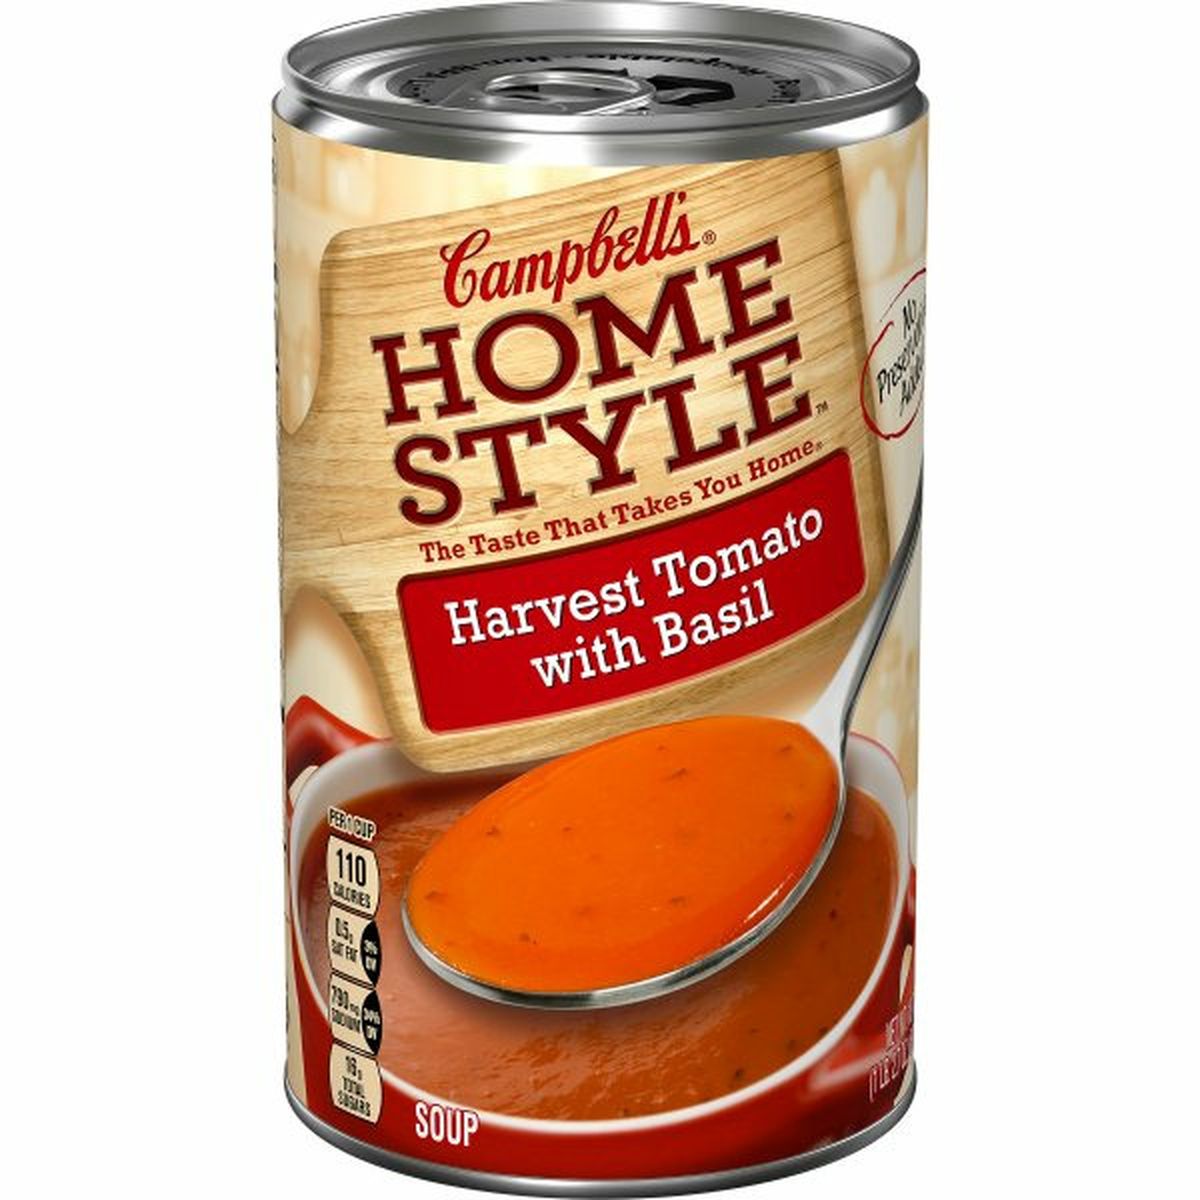 Calories in Campbell'ss Homestyle Homestyle Harvest Tomato with Basil Soup